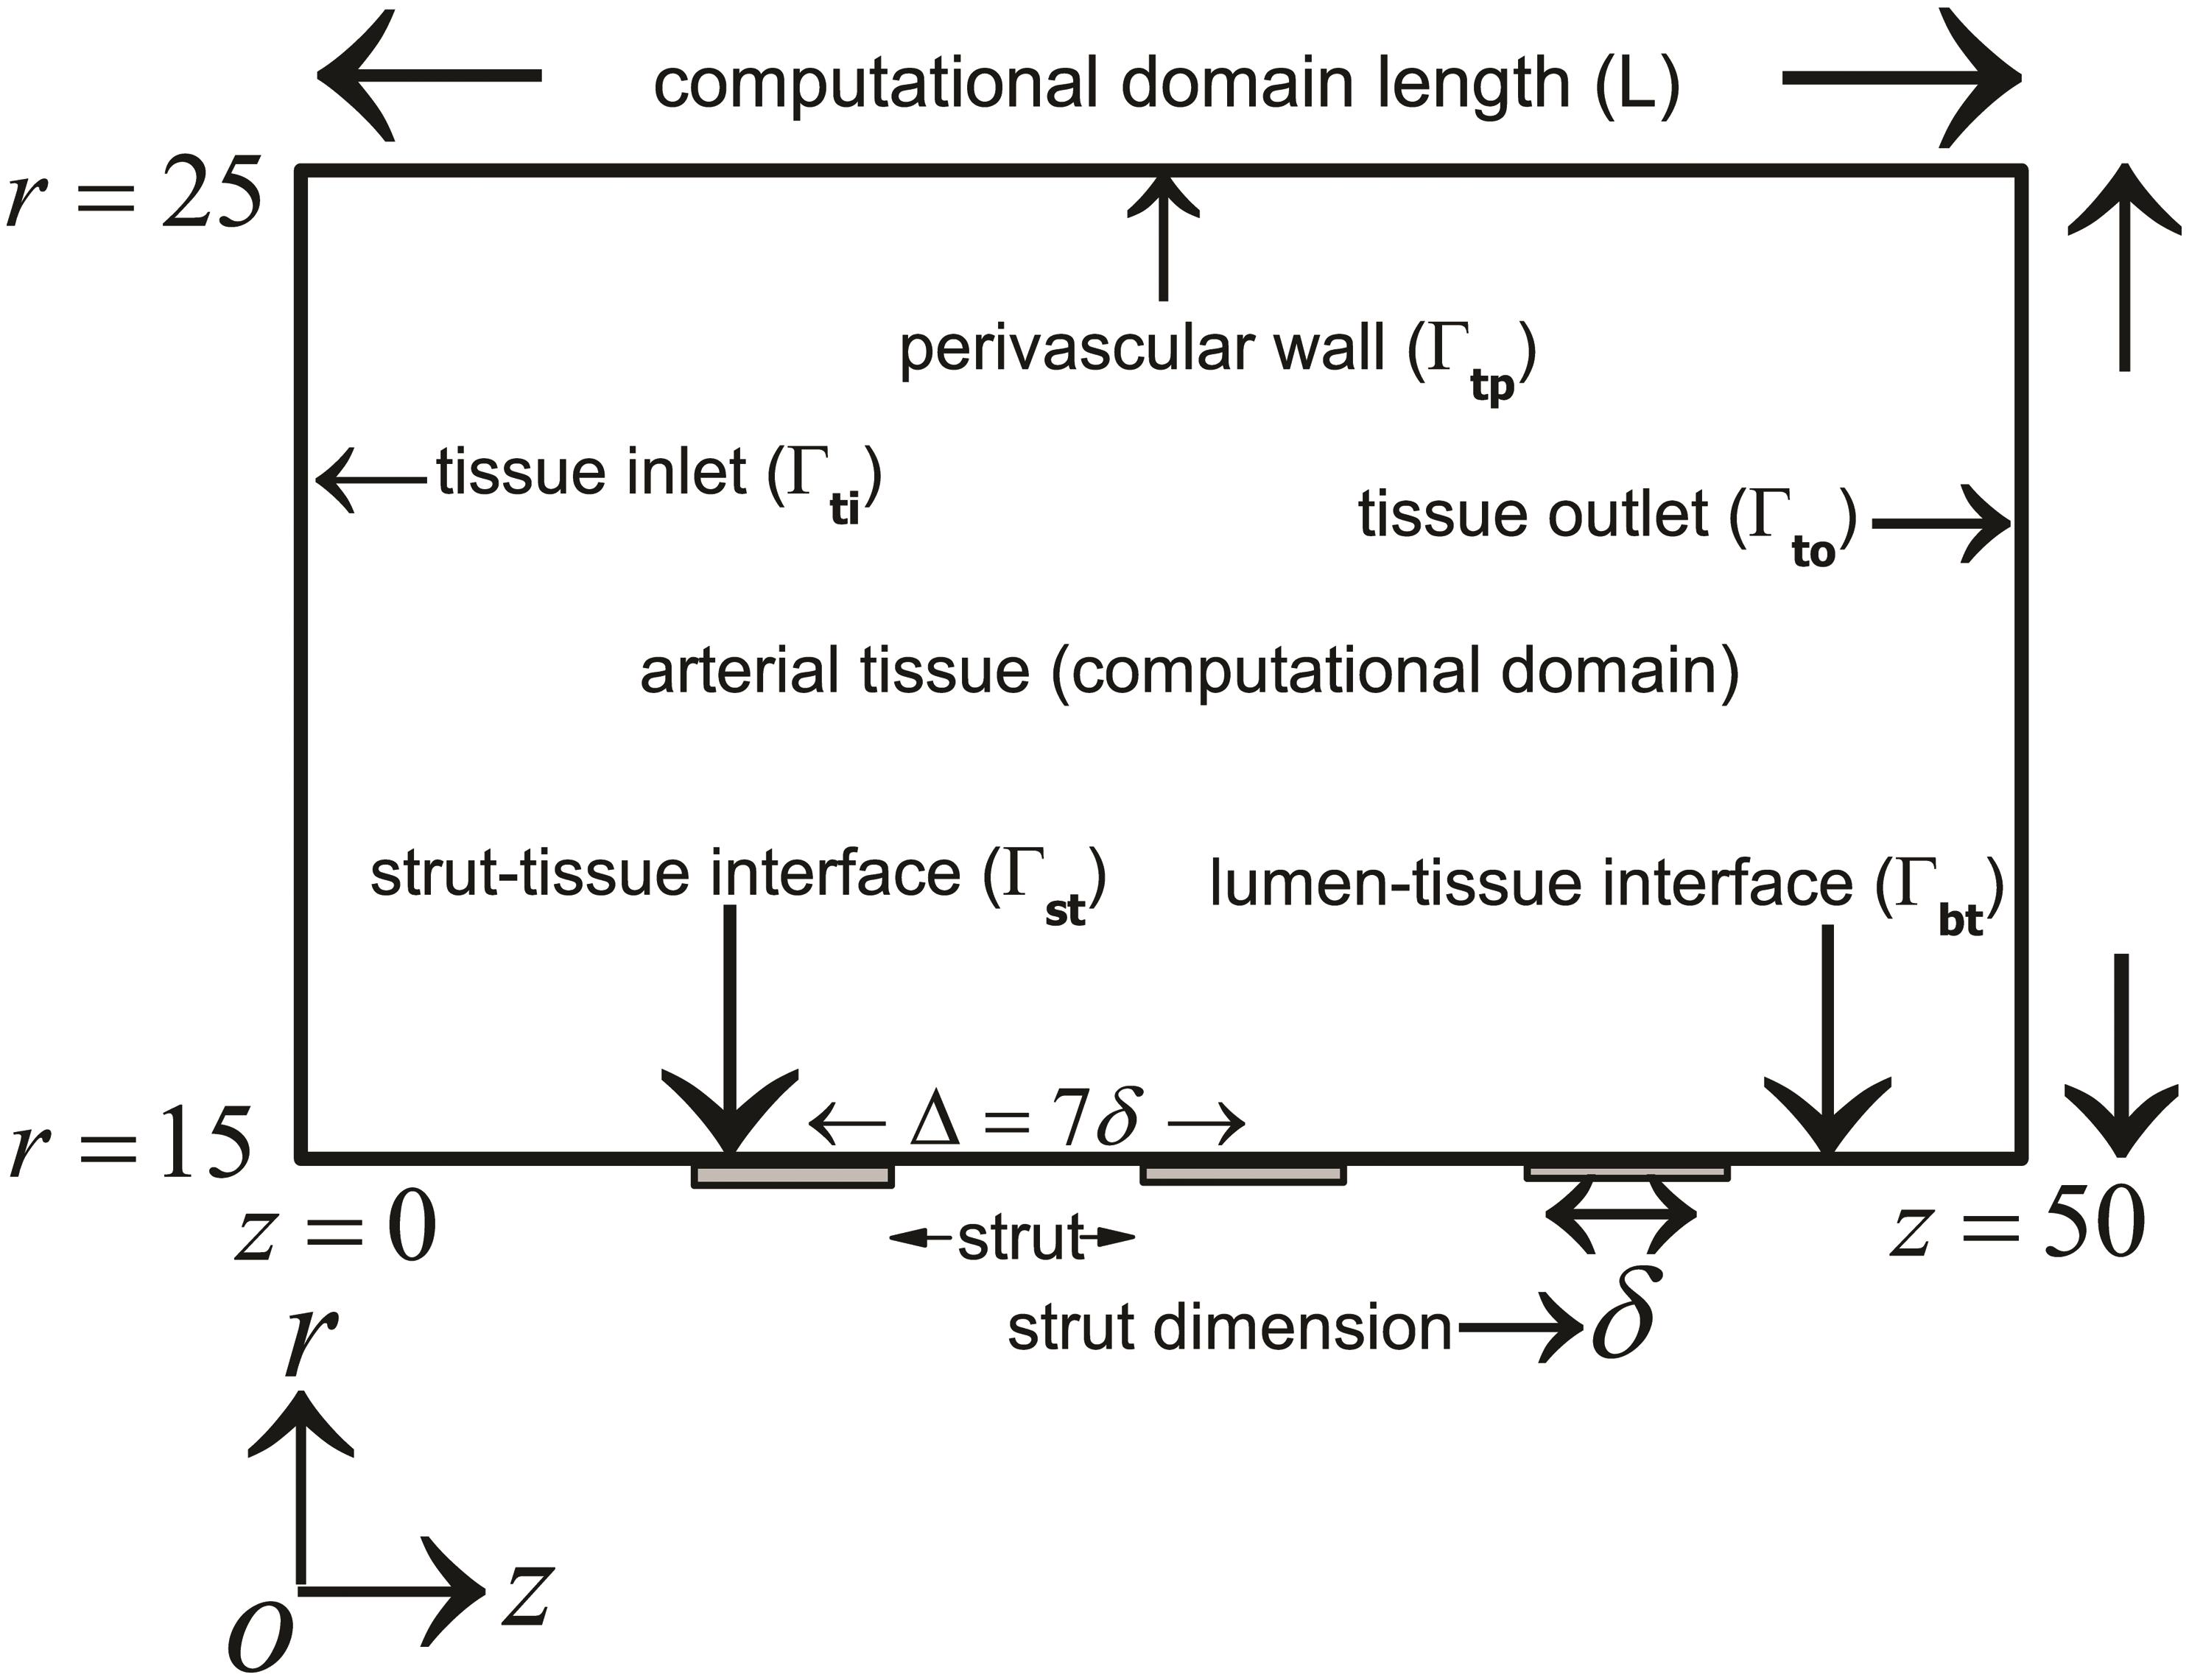 Schematic of the computational model used for the study.